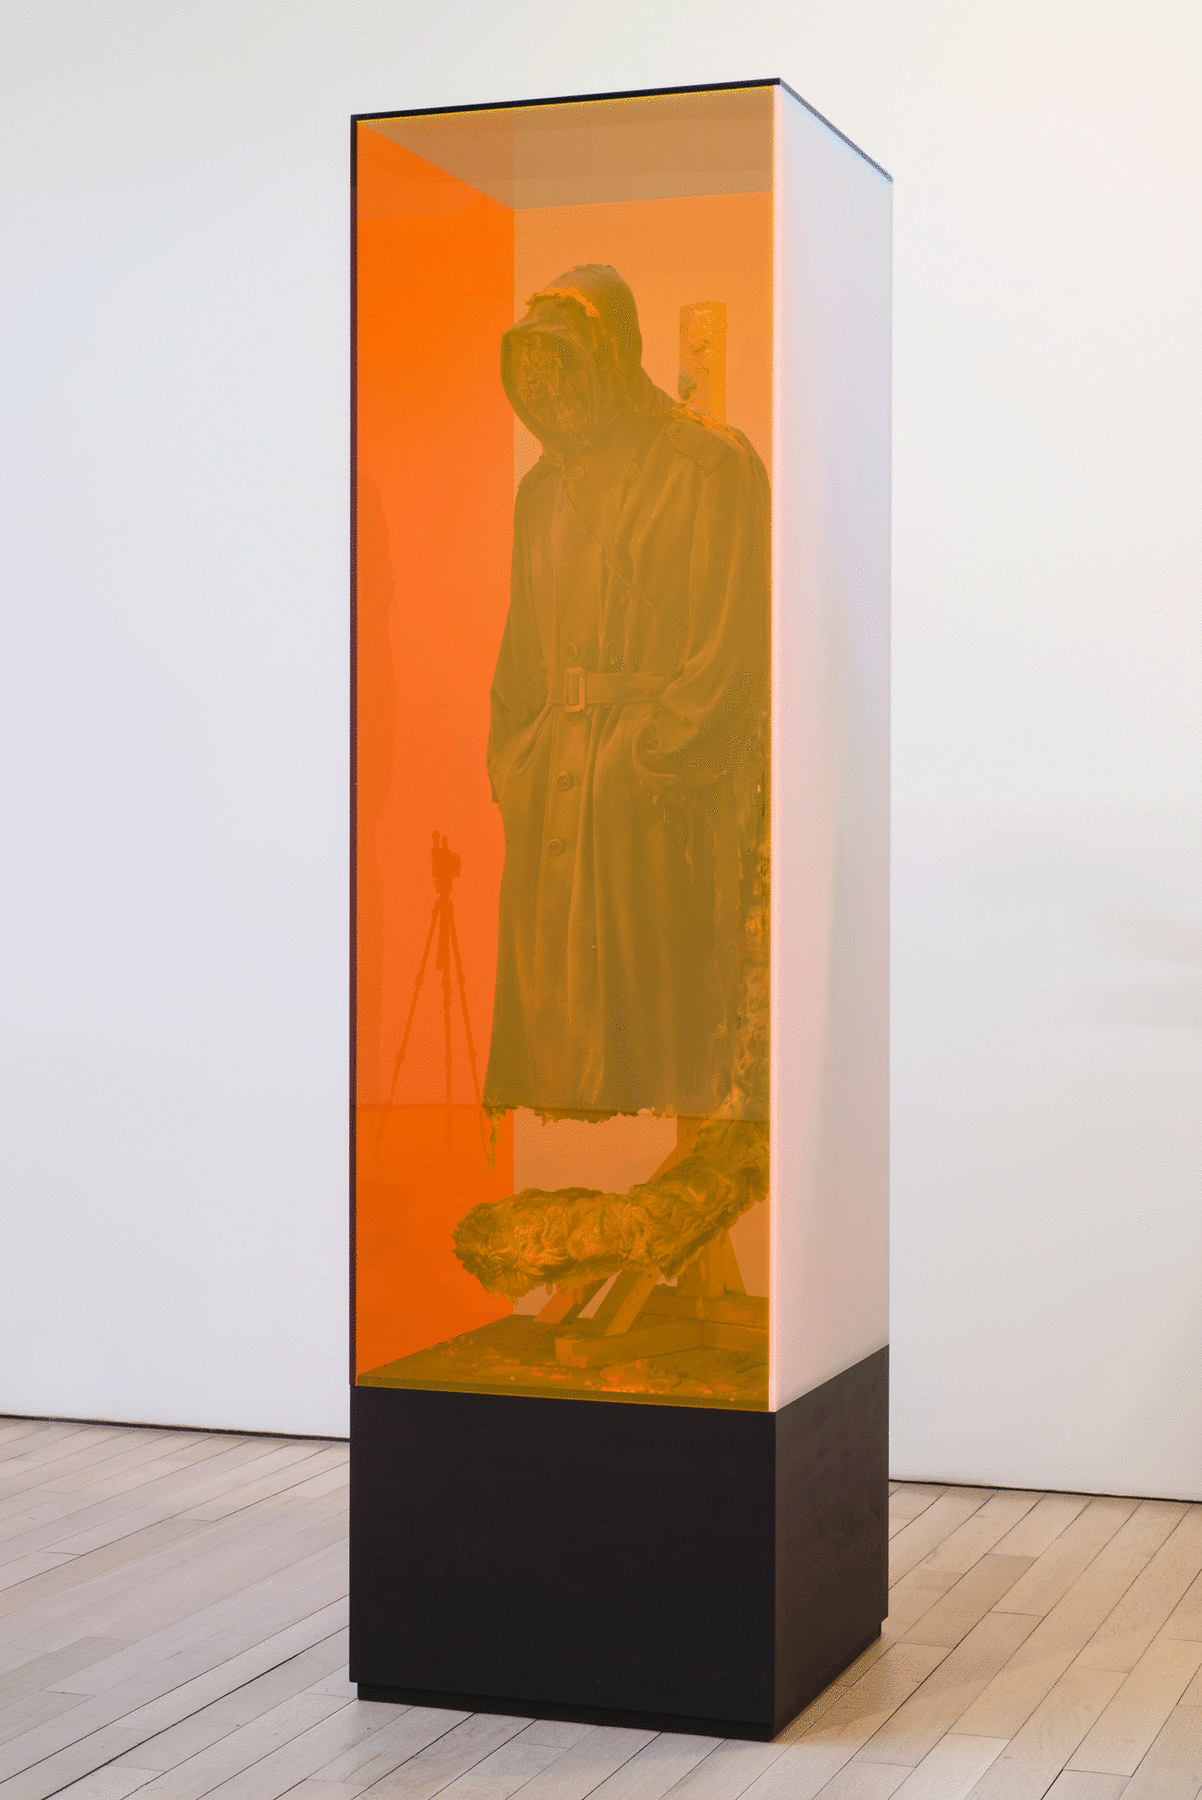 sculpture of floating hooded figure encased in yellow glass